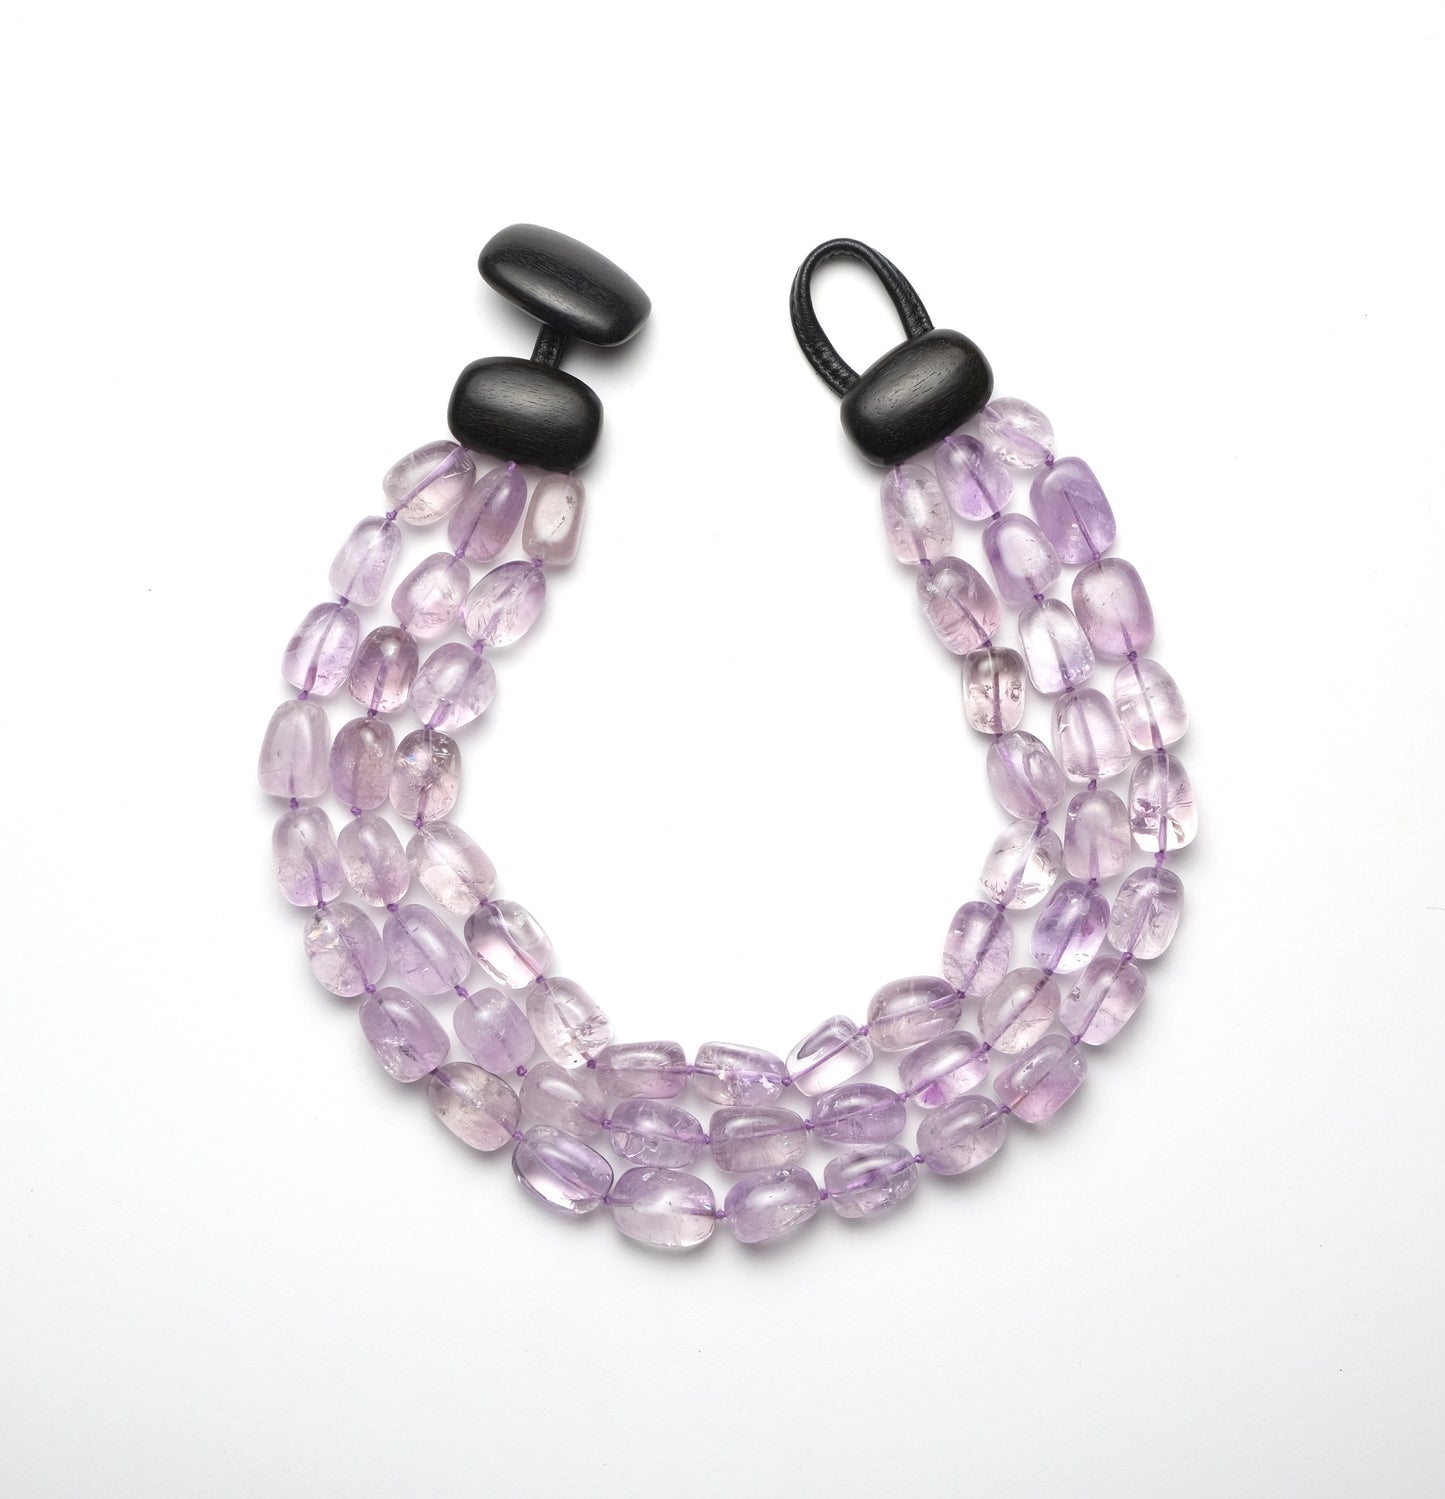 Necklace in amethyst and ebony